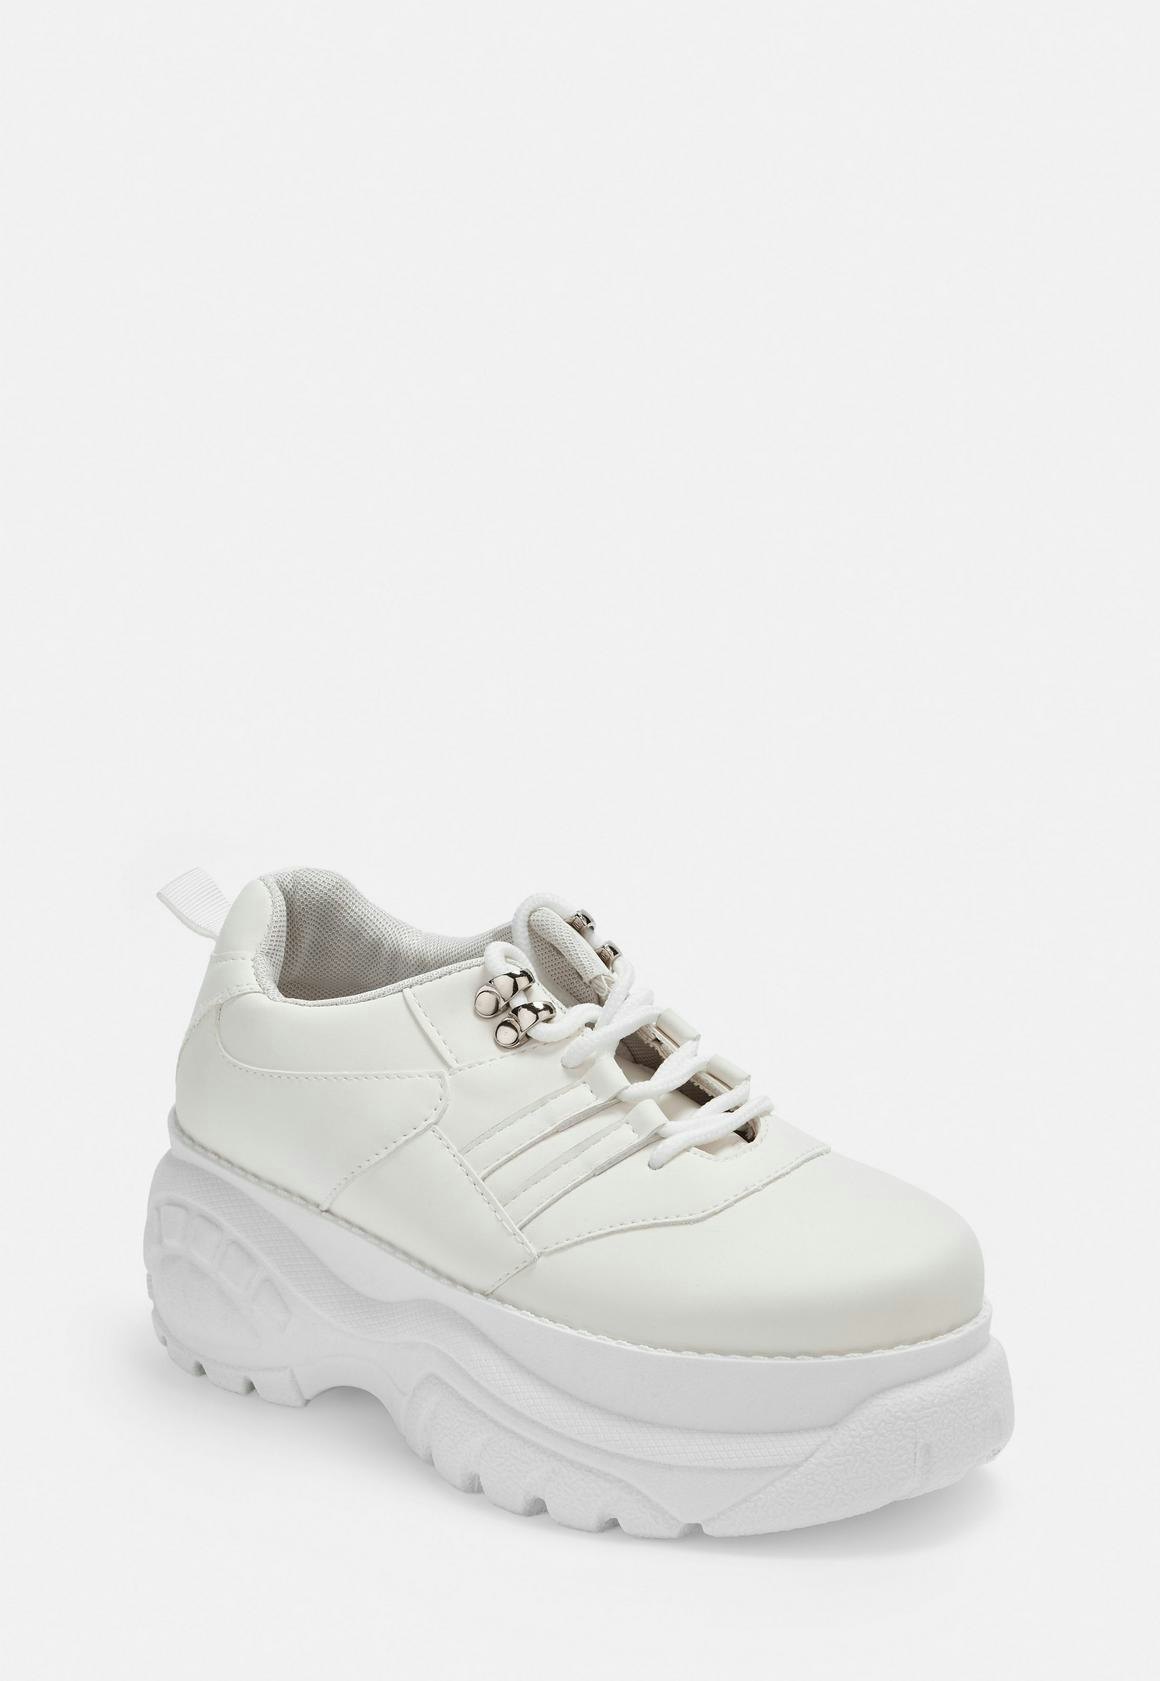 12 Chunky White Sneakers Under $100 